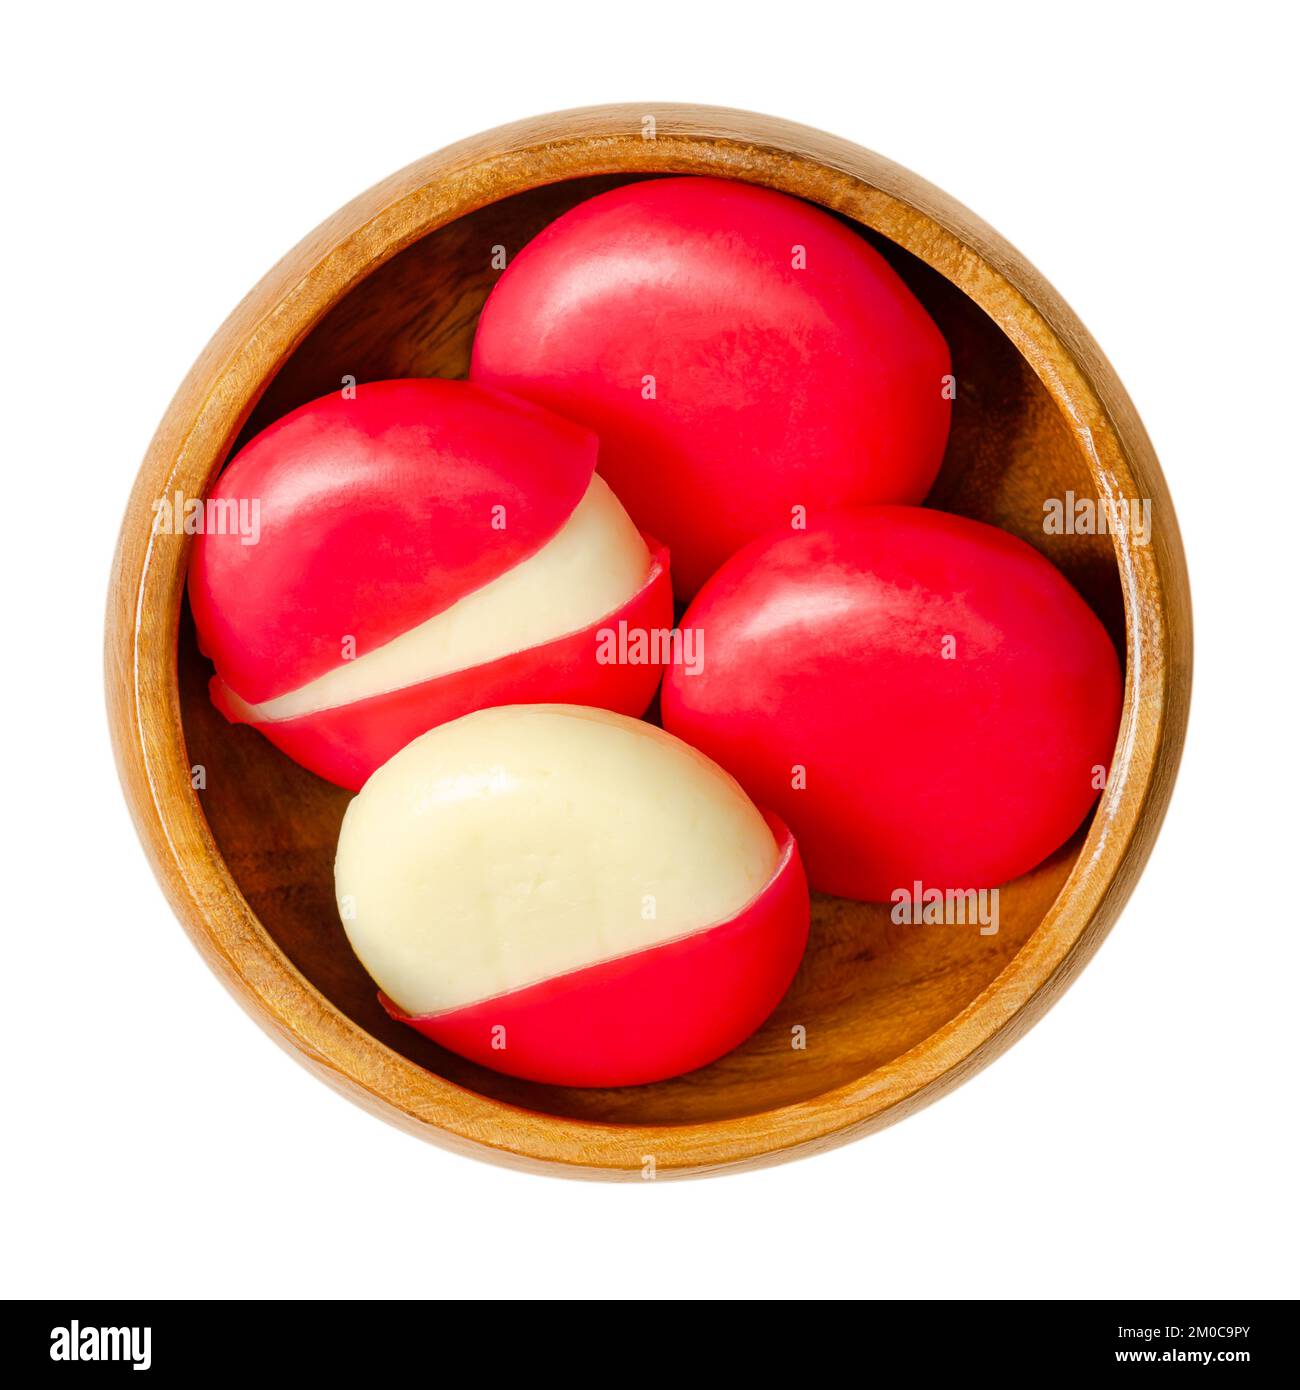 Snack cheese disks in red wax encasements, in a wooden bowl. Small edam slices, each one encased in a blend of red colored paraffin. Stock Photo